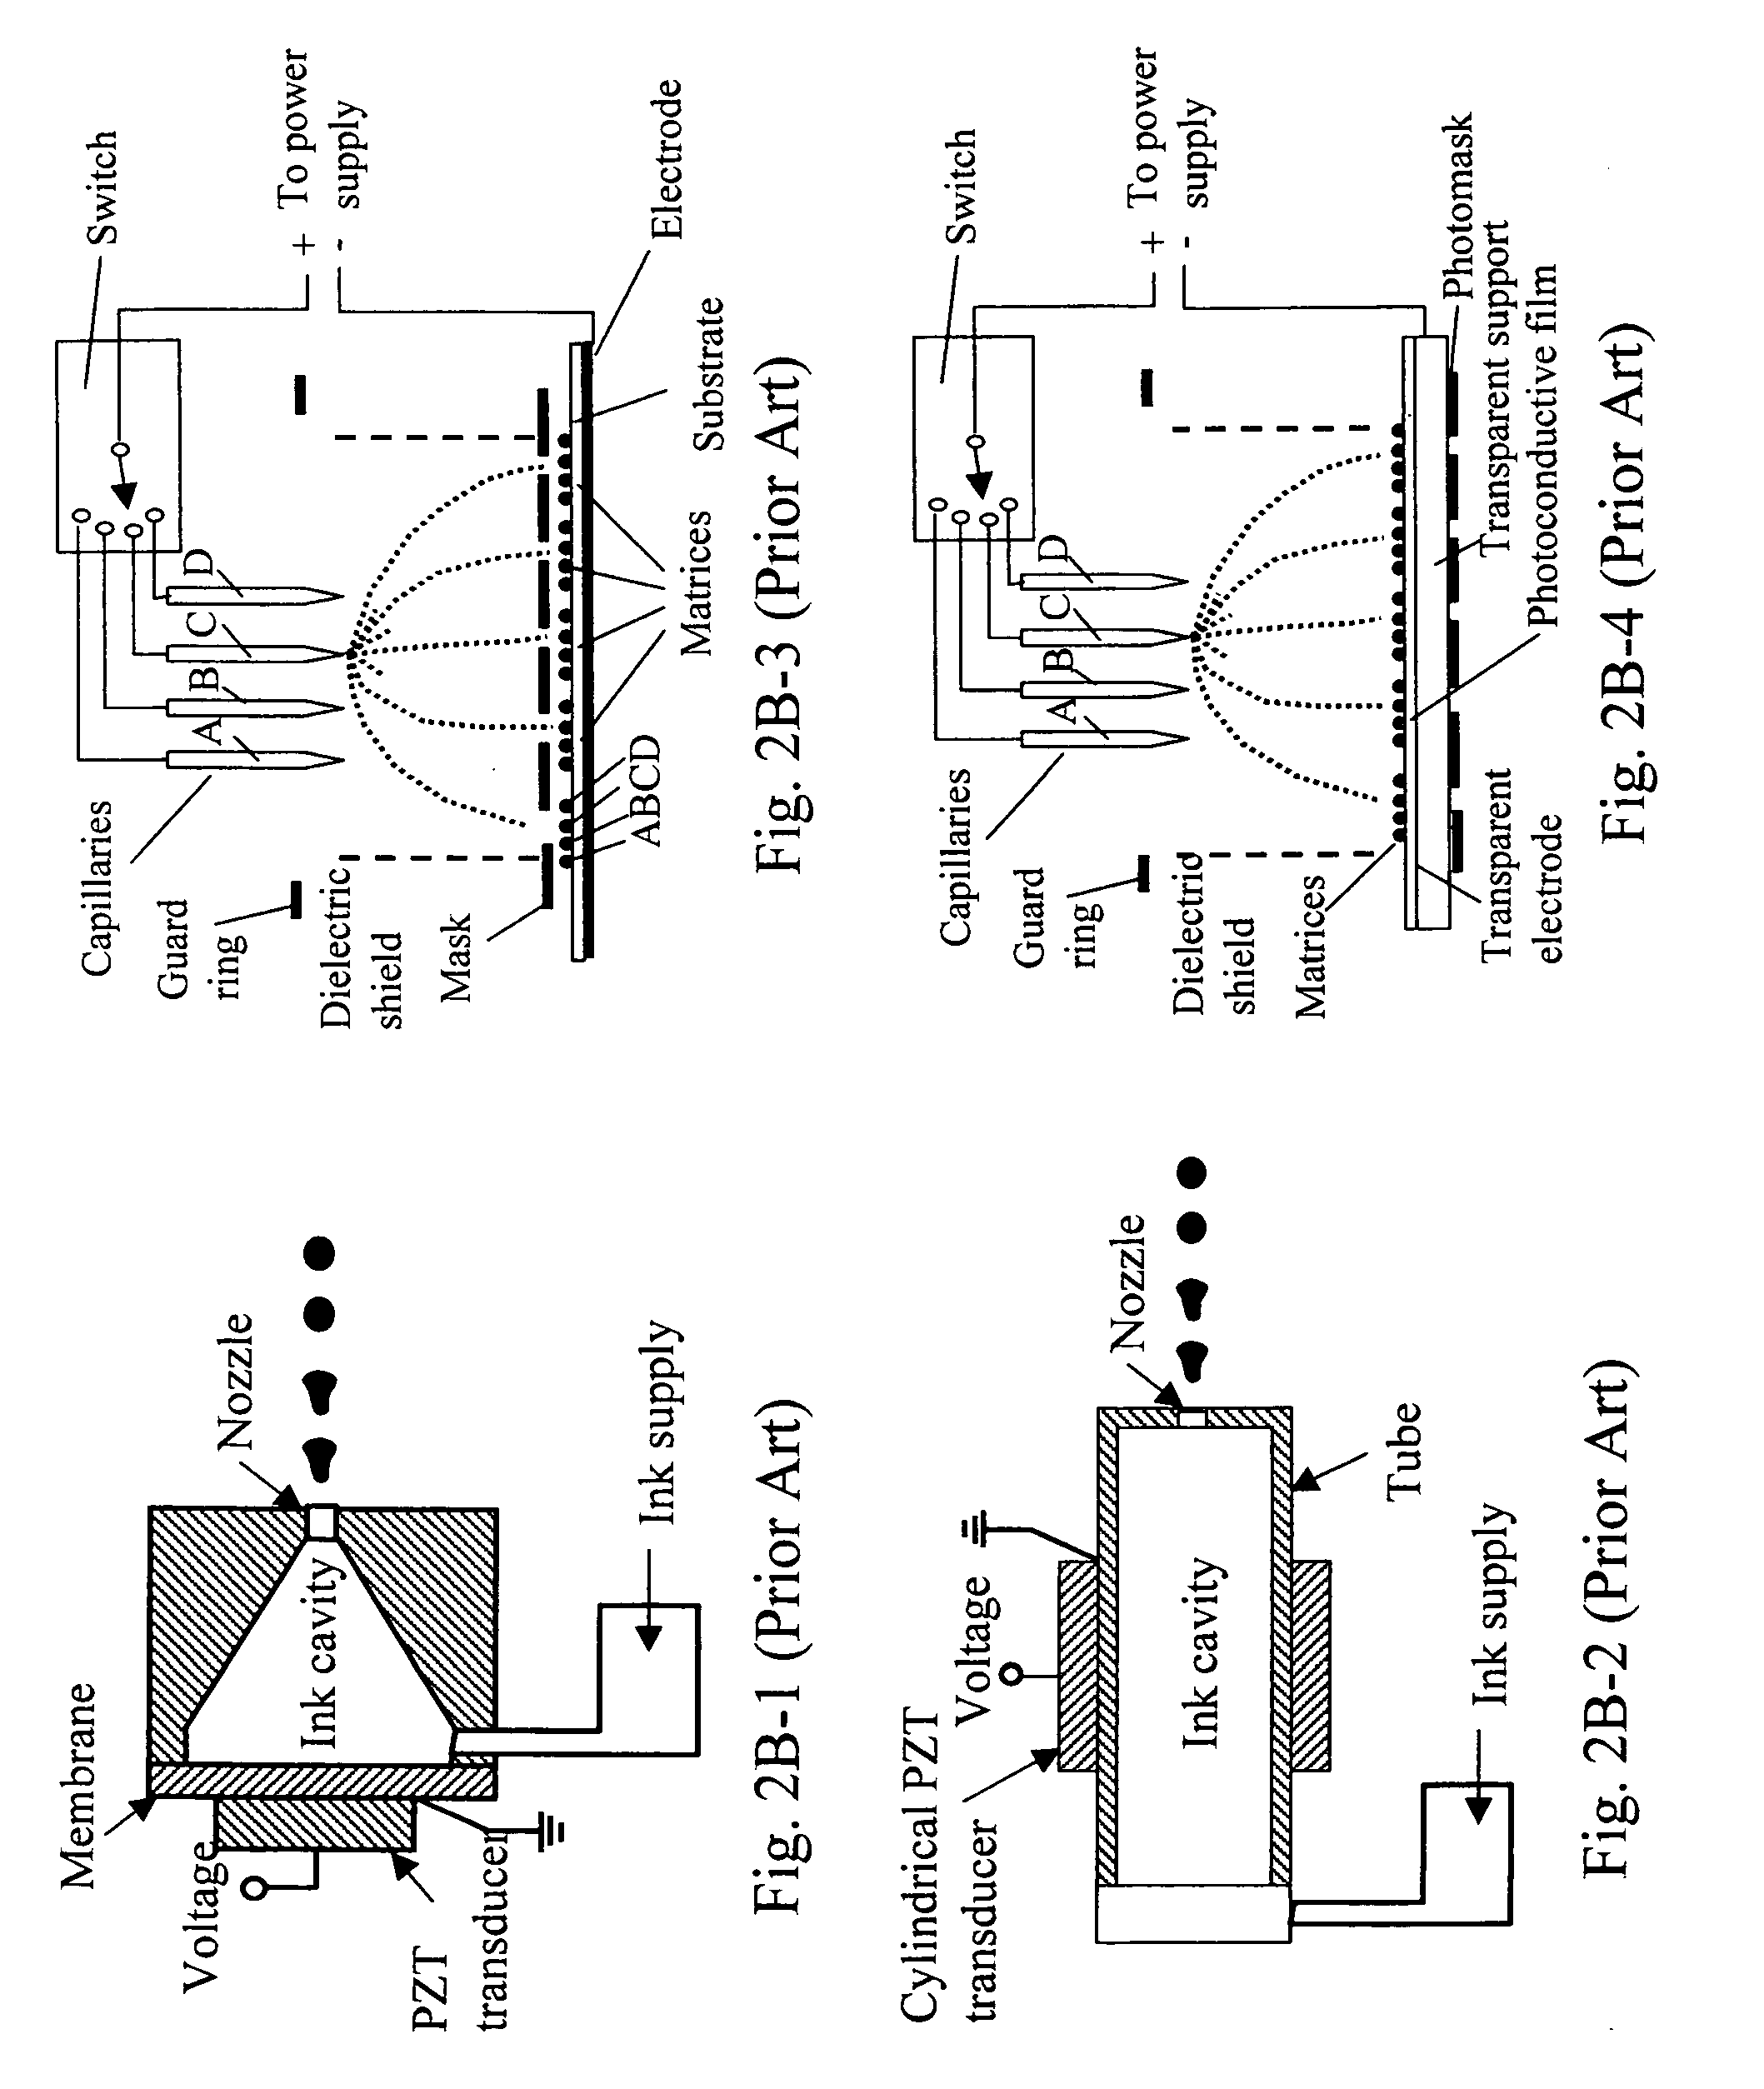 Micro-fabricated stamp array for depositing biologic diagnostic testing samples on bio-bindable surface